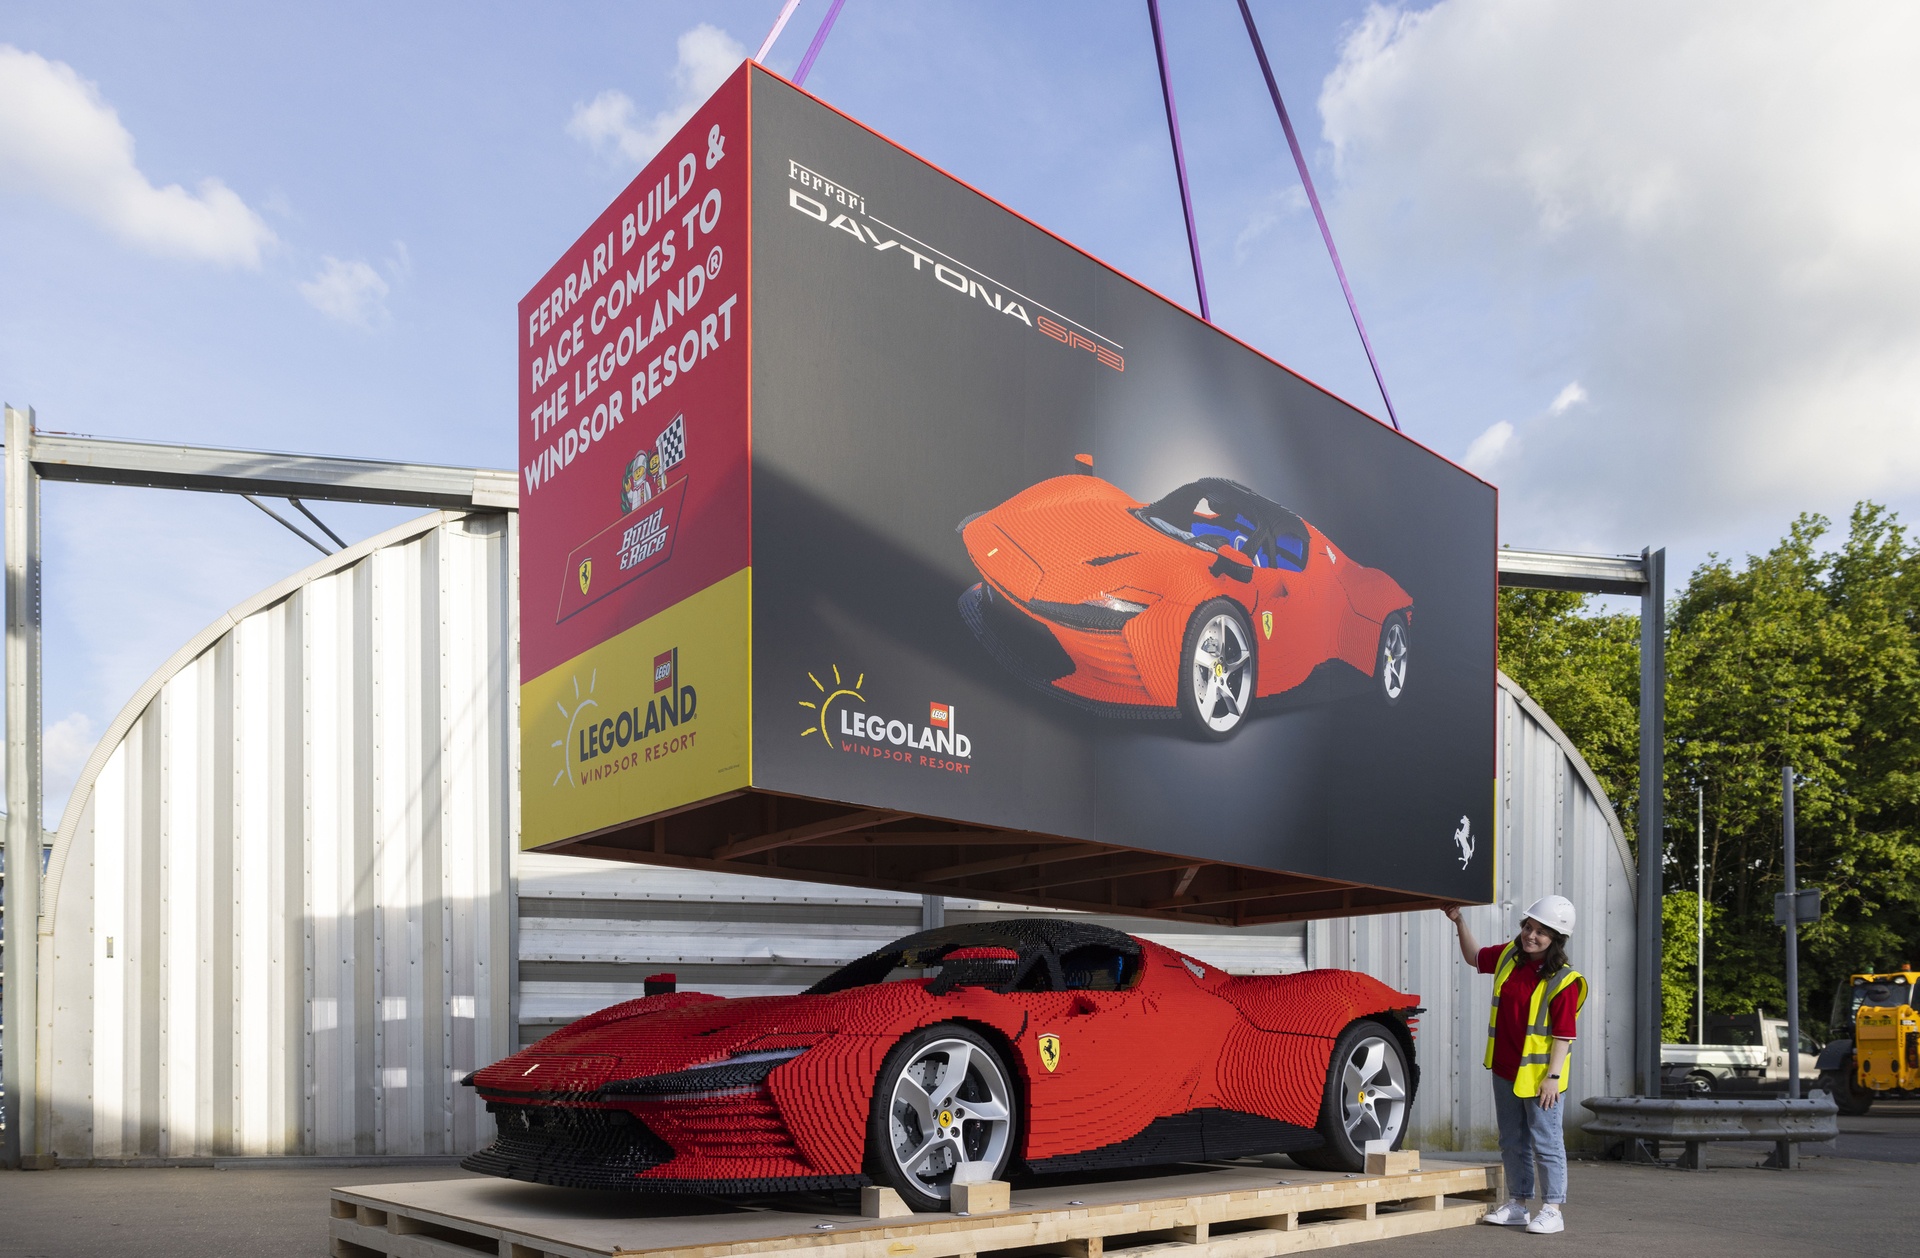 World's first life-sized Lego Ferrari Daytona SP3 made from 402,836 bricks, being 'unboxed' which will now go on permanent display at the theme park's latest attraction